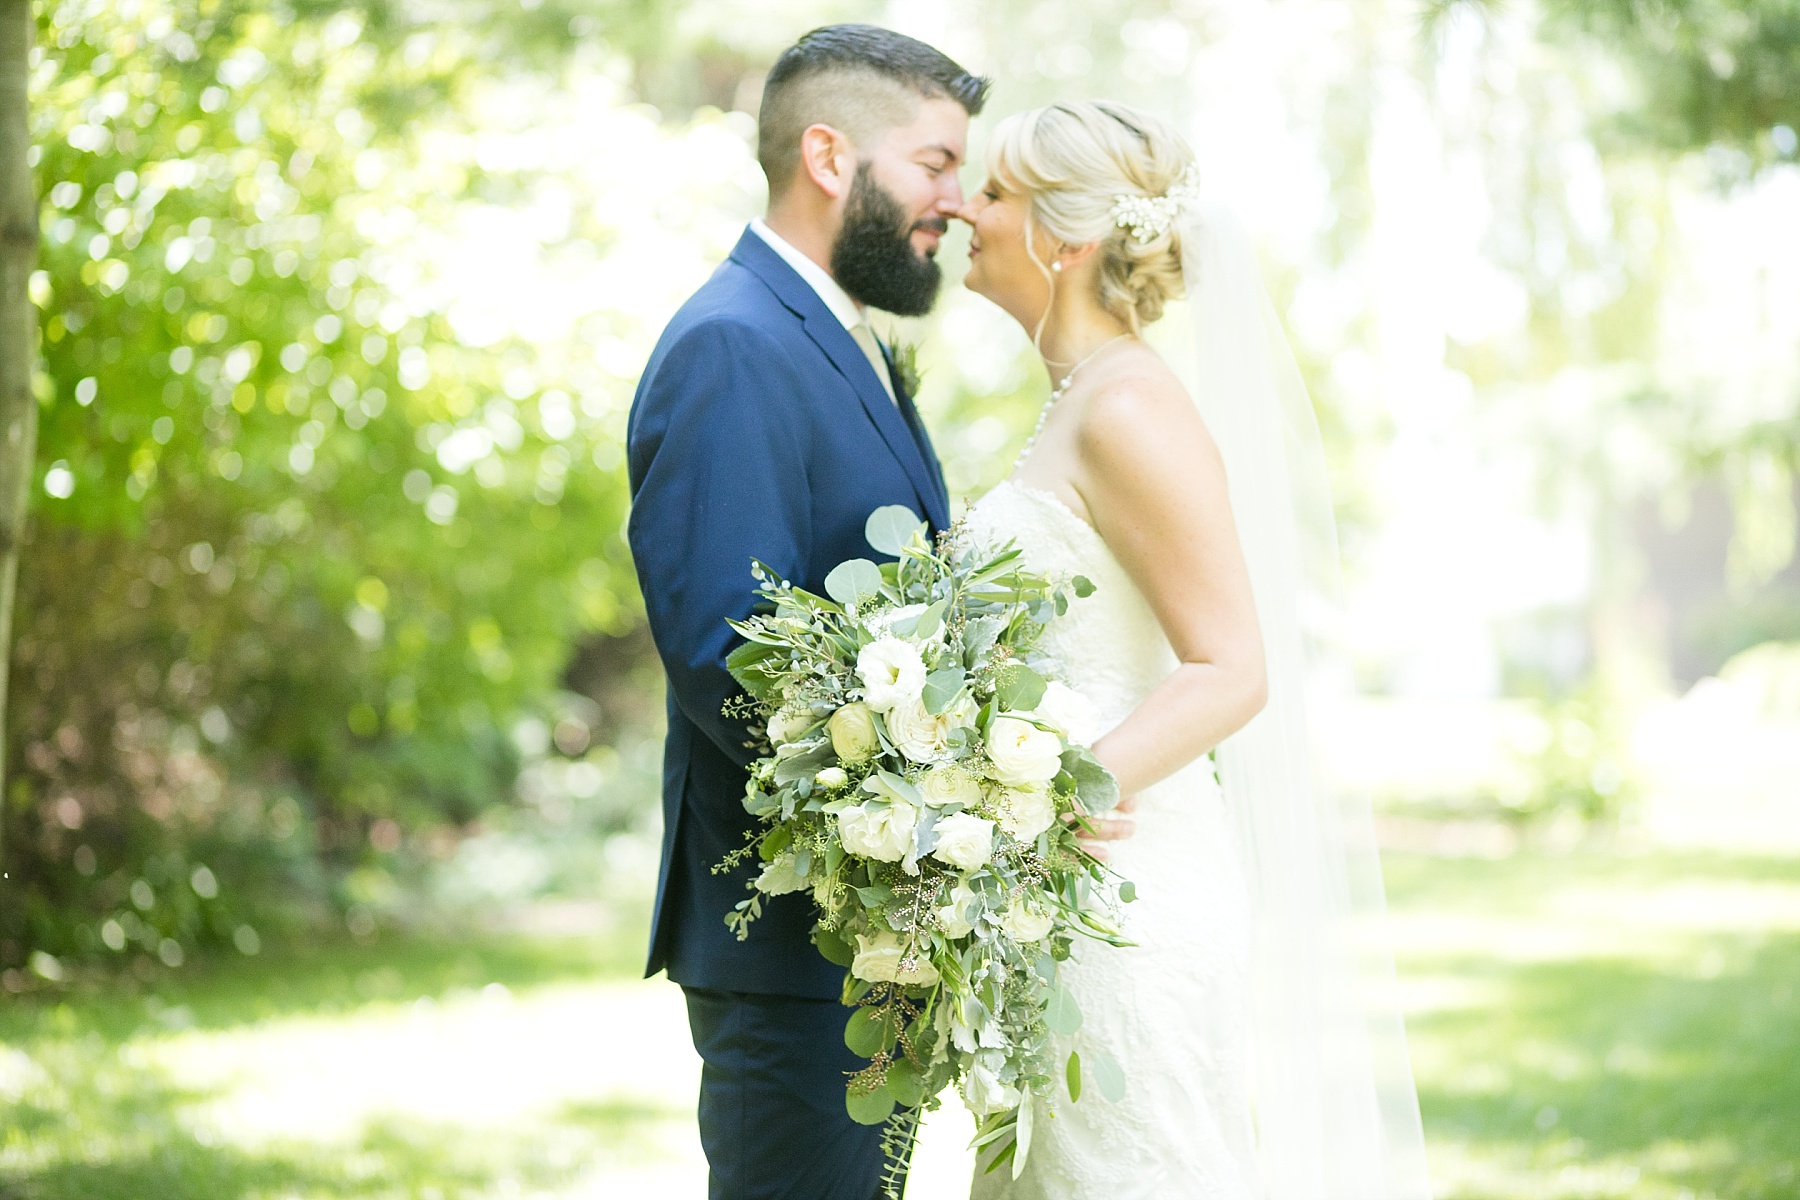 A eucalyptus filled wedding at The Florian Gardens in Eau Claire.